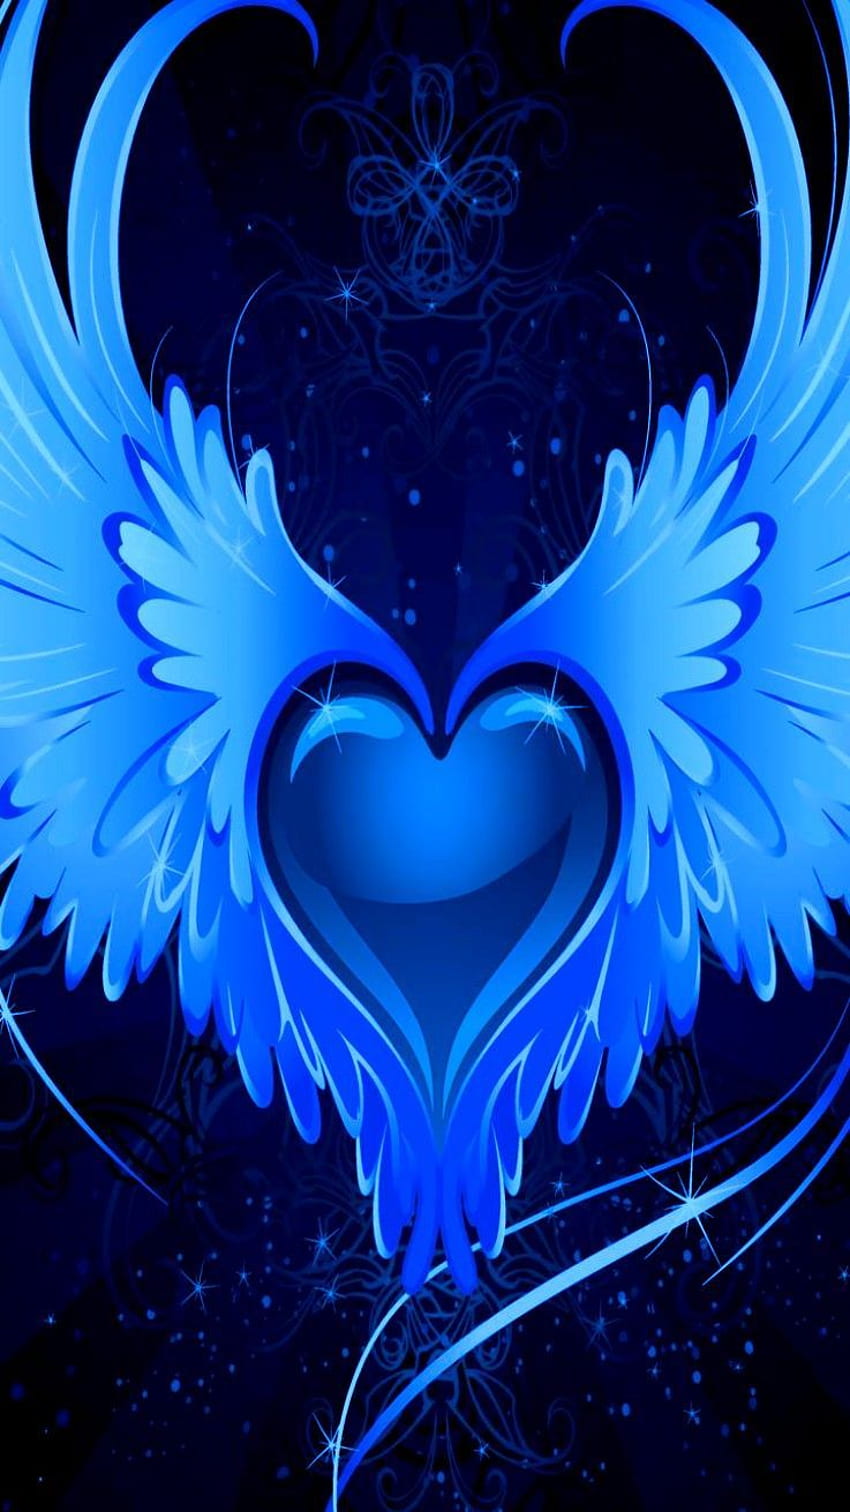 20900 Angel Wings Heart Stock Photos Pictures  RoyaltyFree Images   iStock